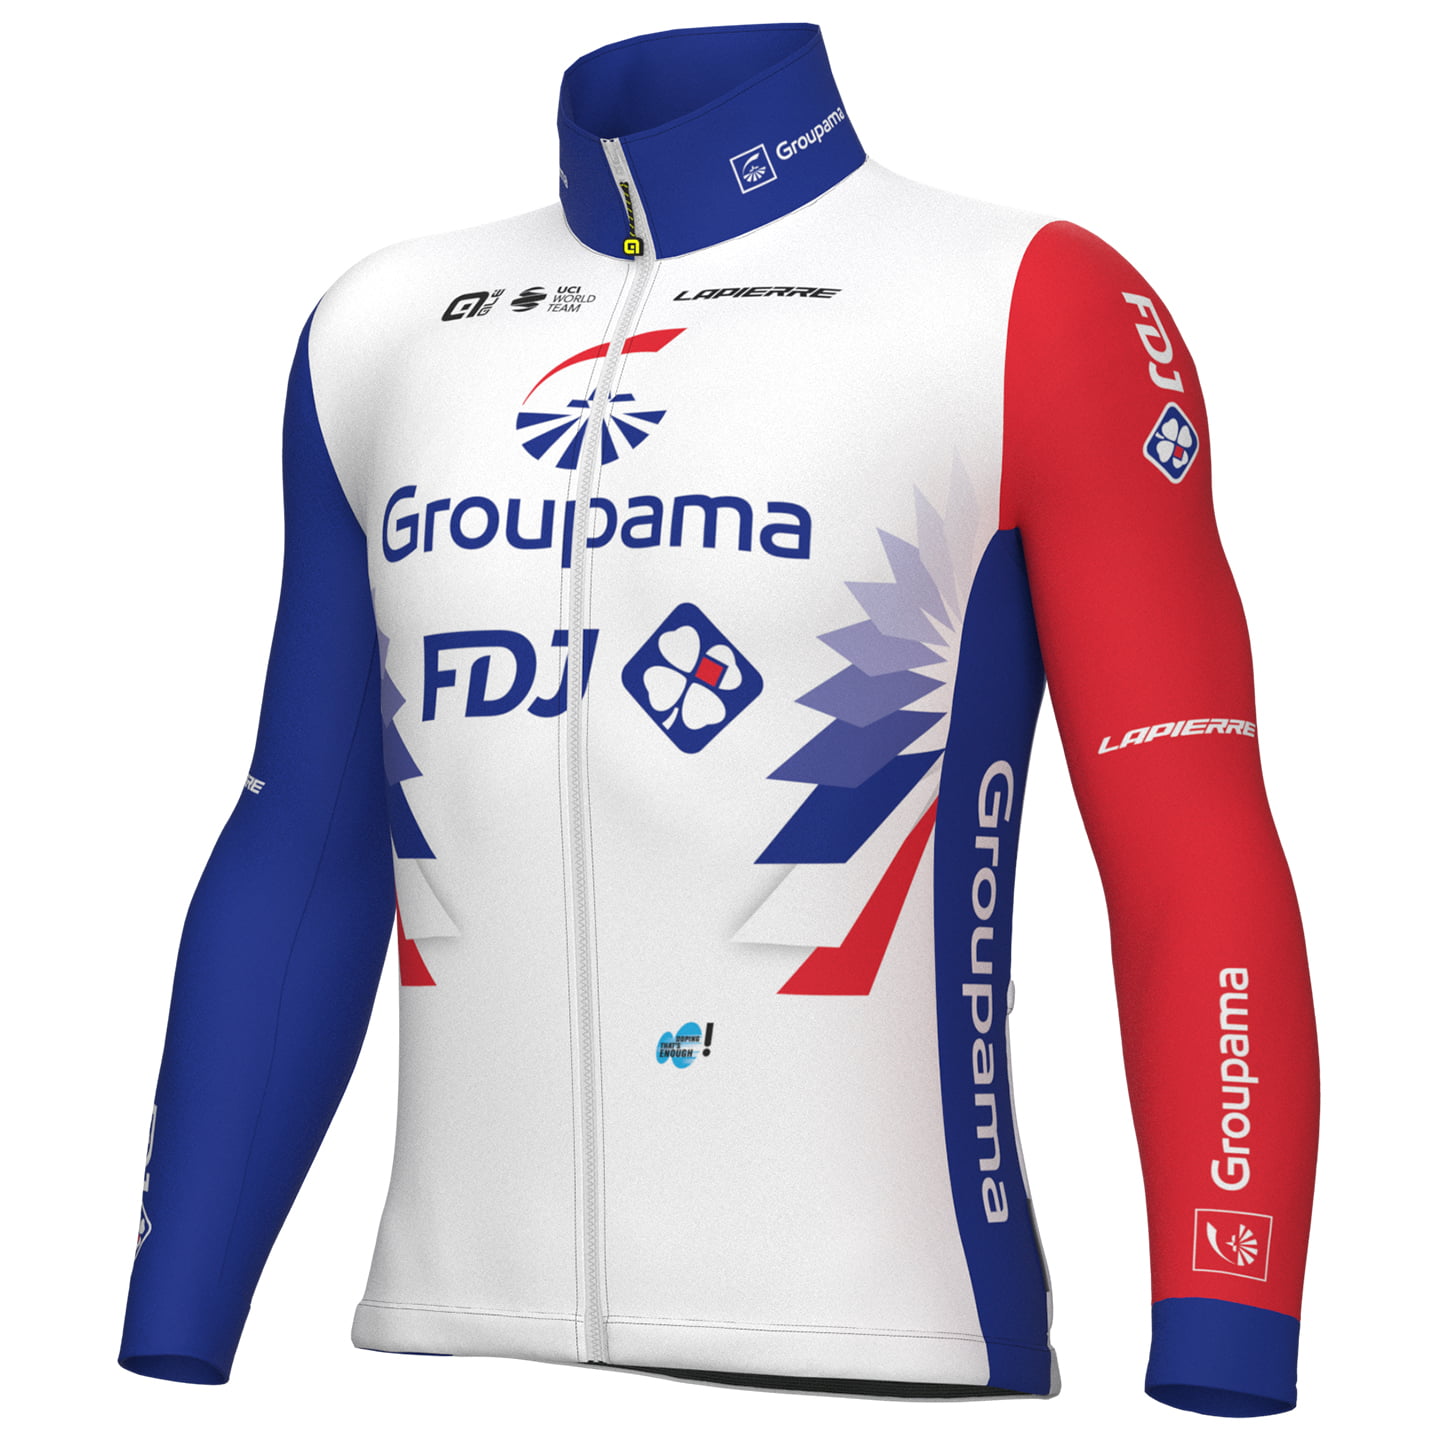 GROUPAMA - FDJ 2022 Thermal Jacket, for men, size 2XL, Cycle jacket, Cycling gear